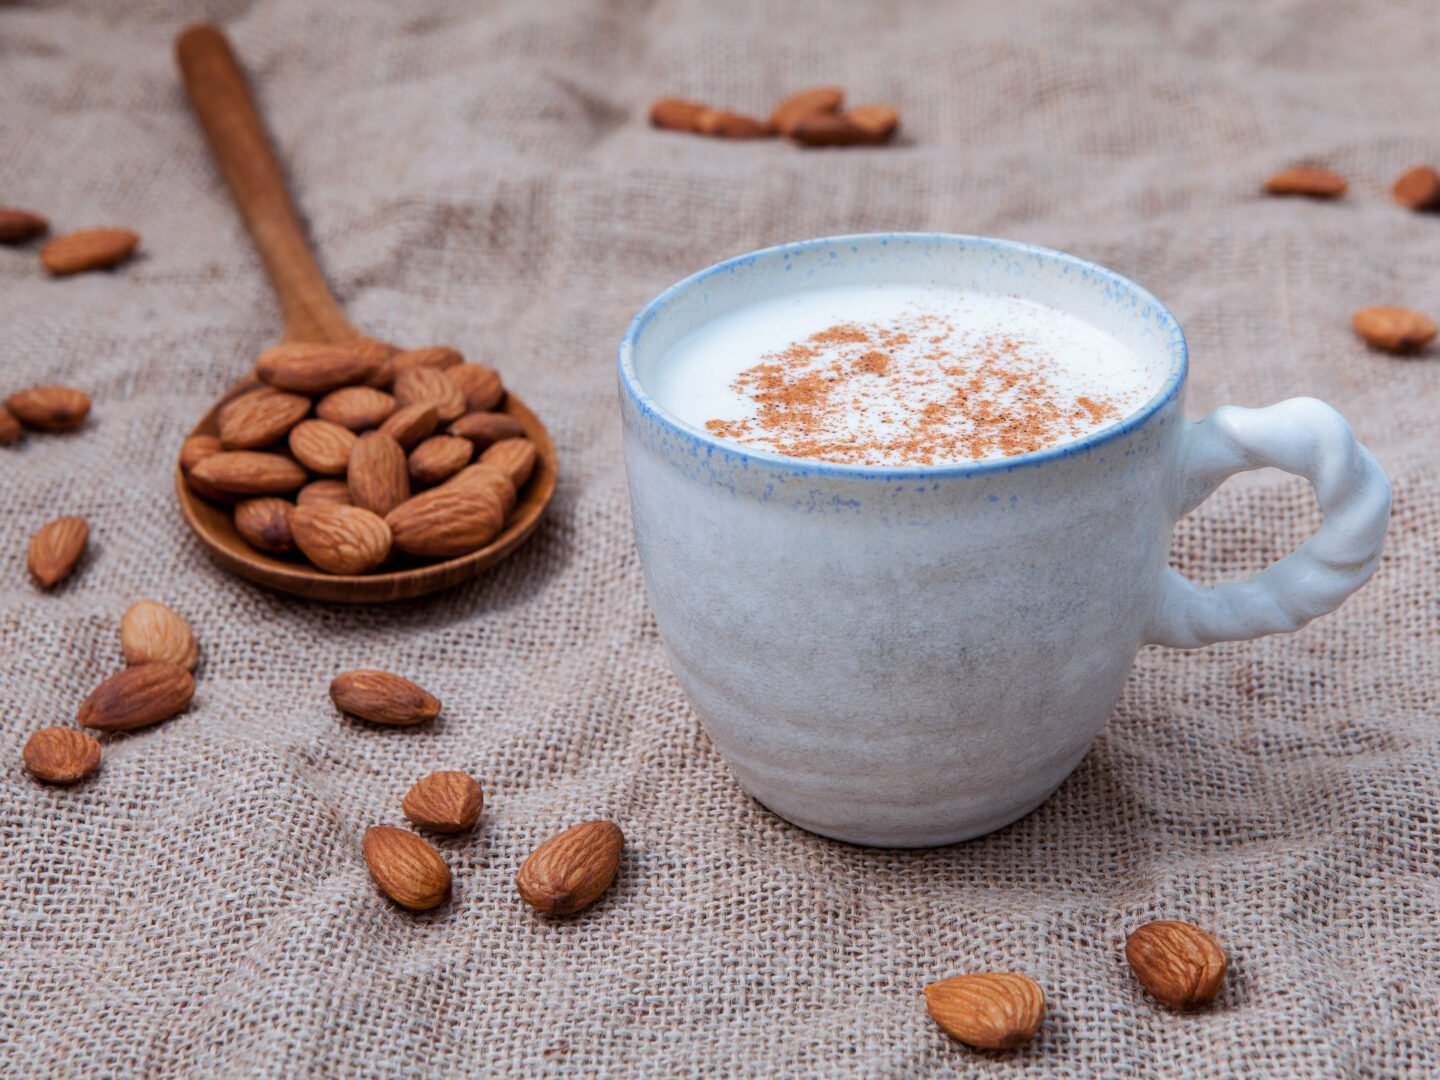 Homemade,Almond,Milk,In,The,Coffee,Cup,With,Almond,In